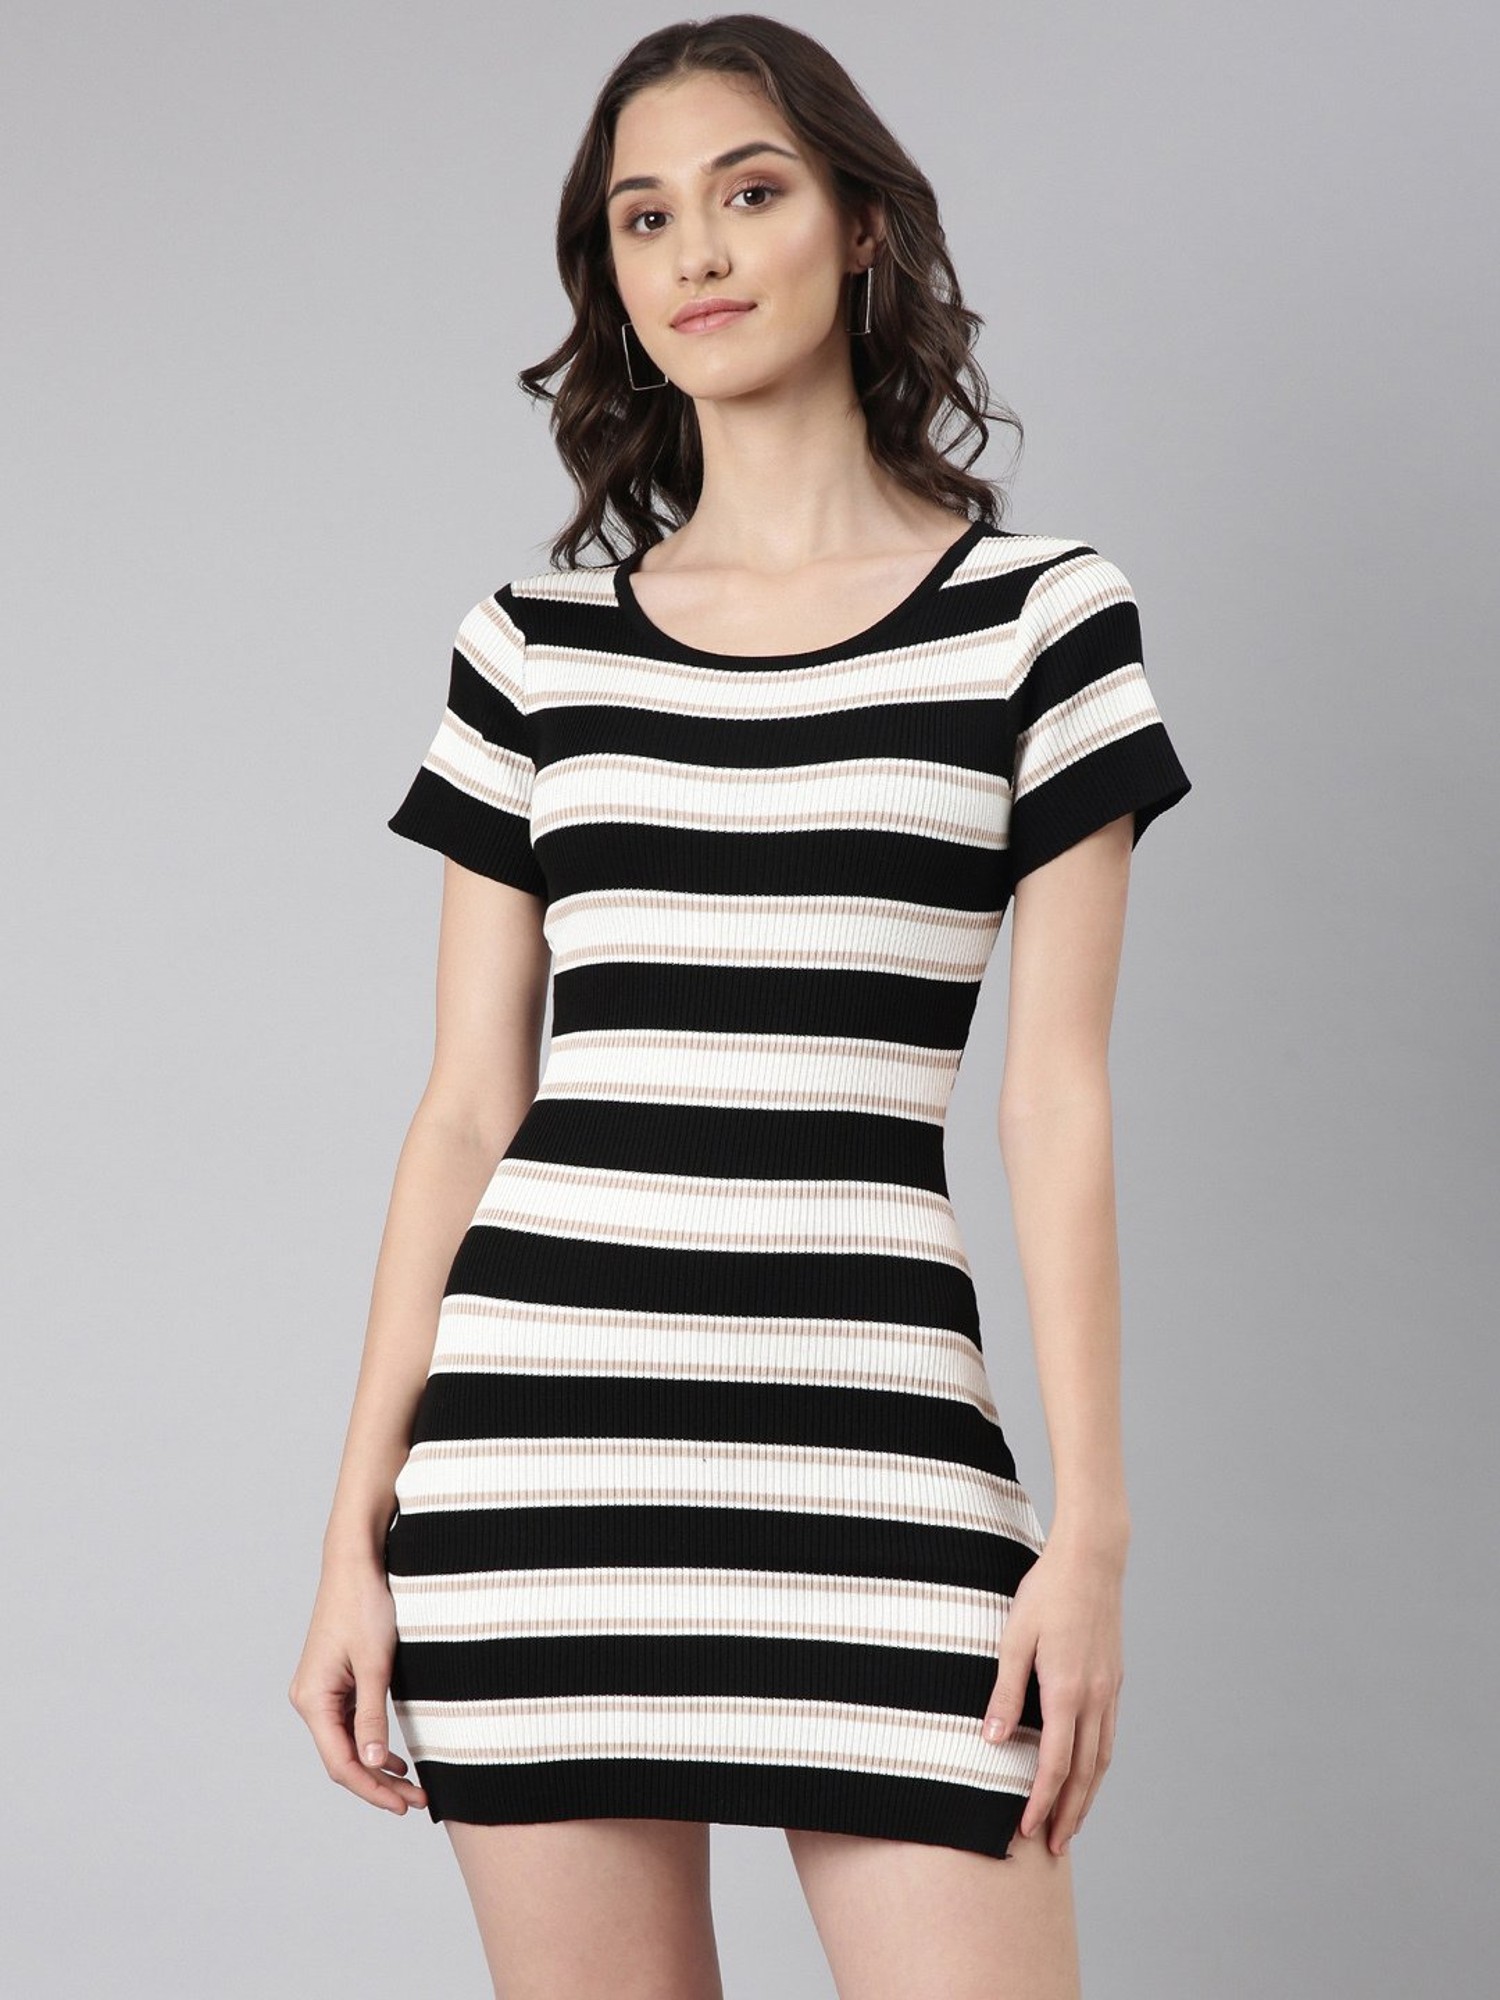 Yellow and White Striped Dress? Absolutely! - High Heels & Good Meals